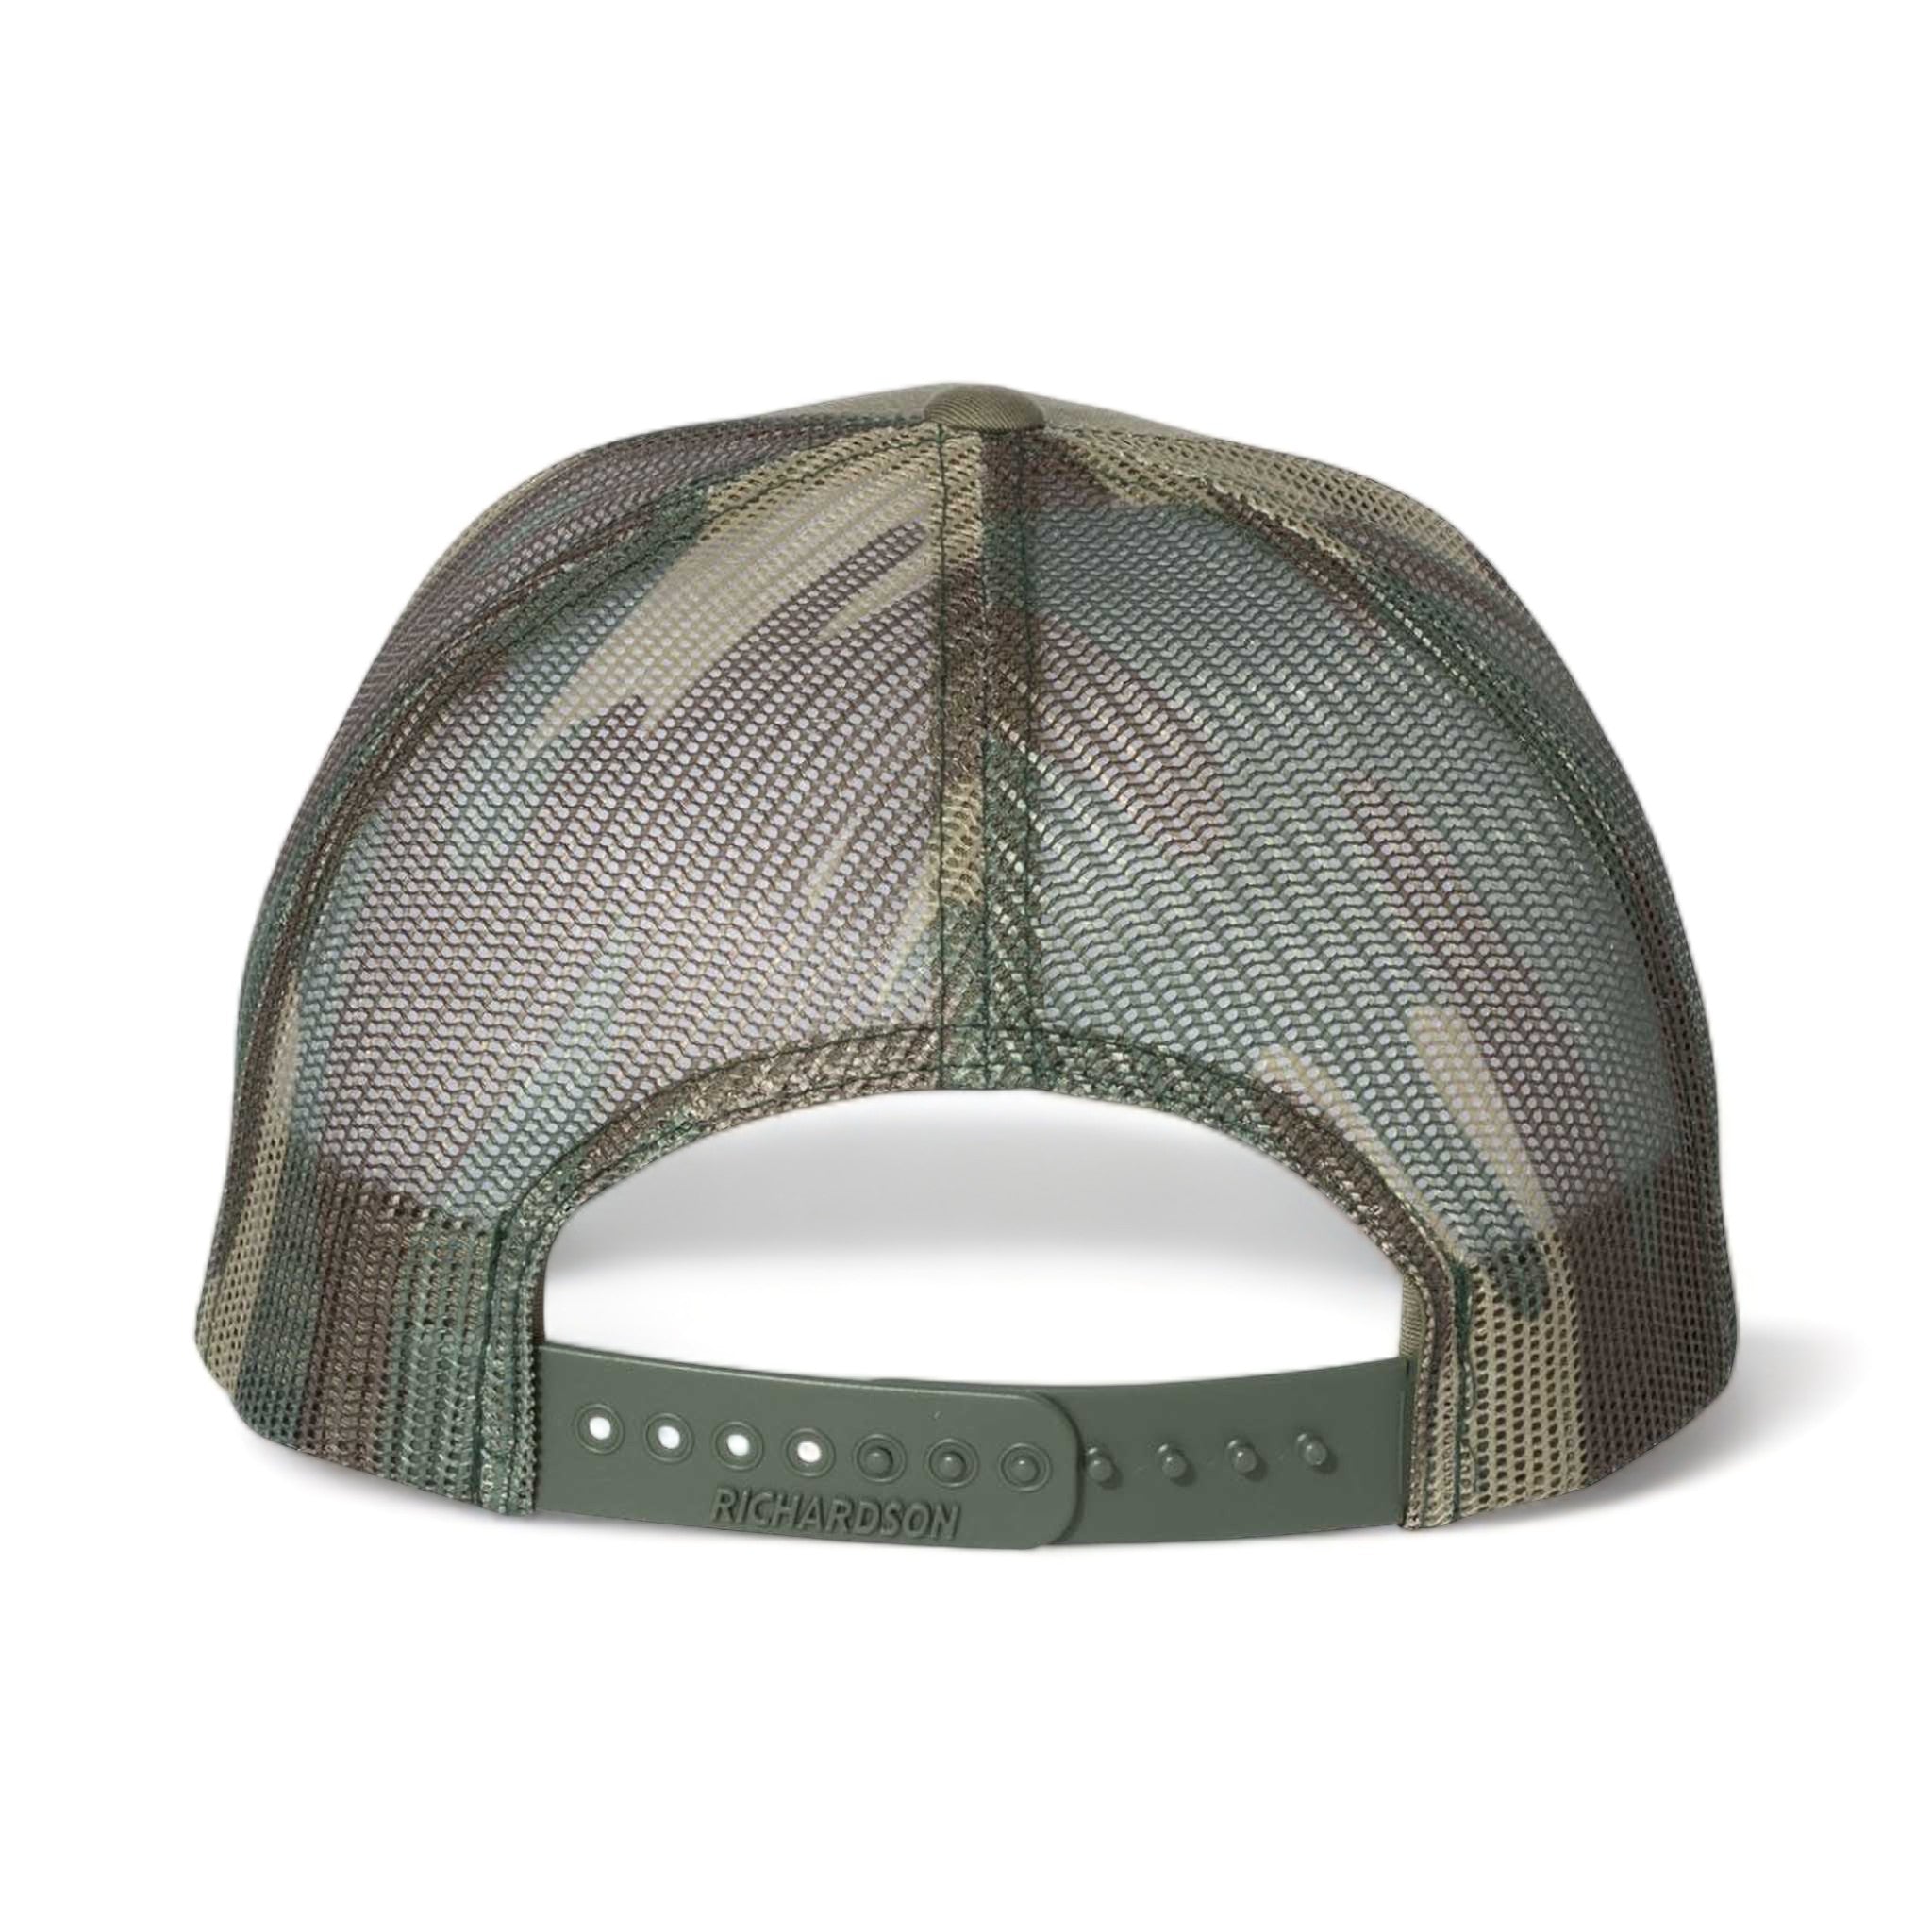 Back view of Richardson 112PM custom hat in loden and green camo